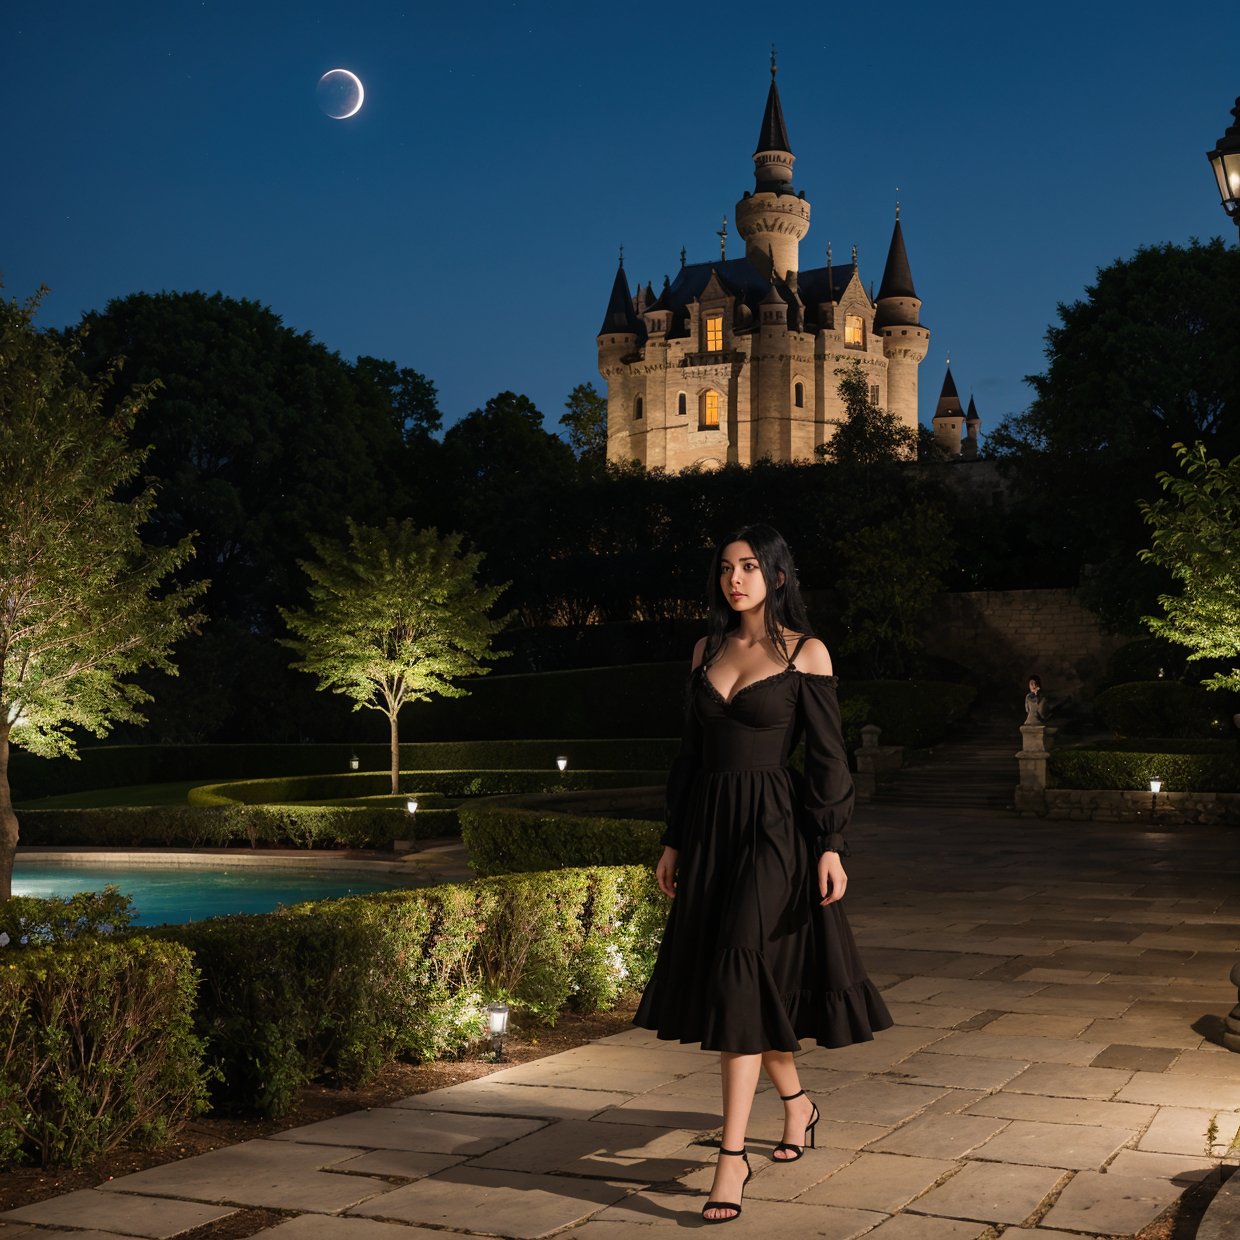 A girl with black hair walking in the castle garden on full moon night